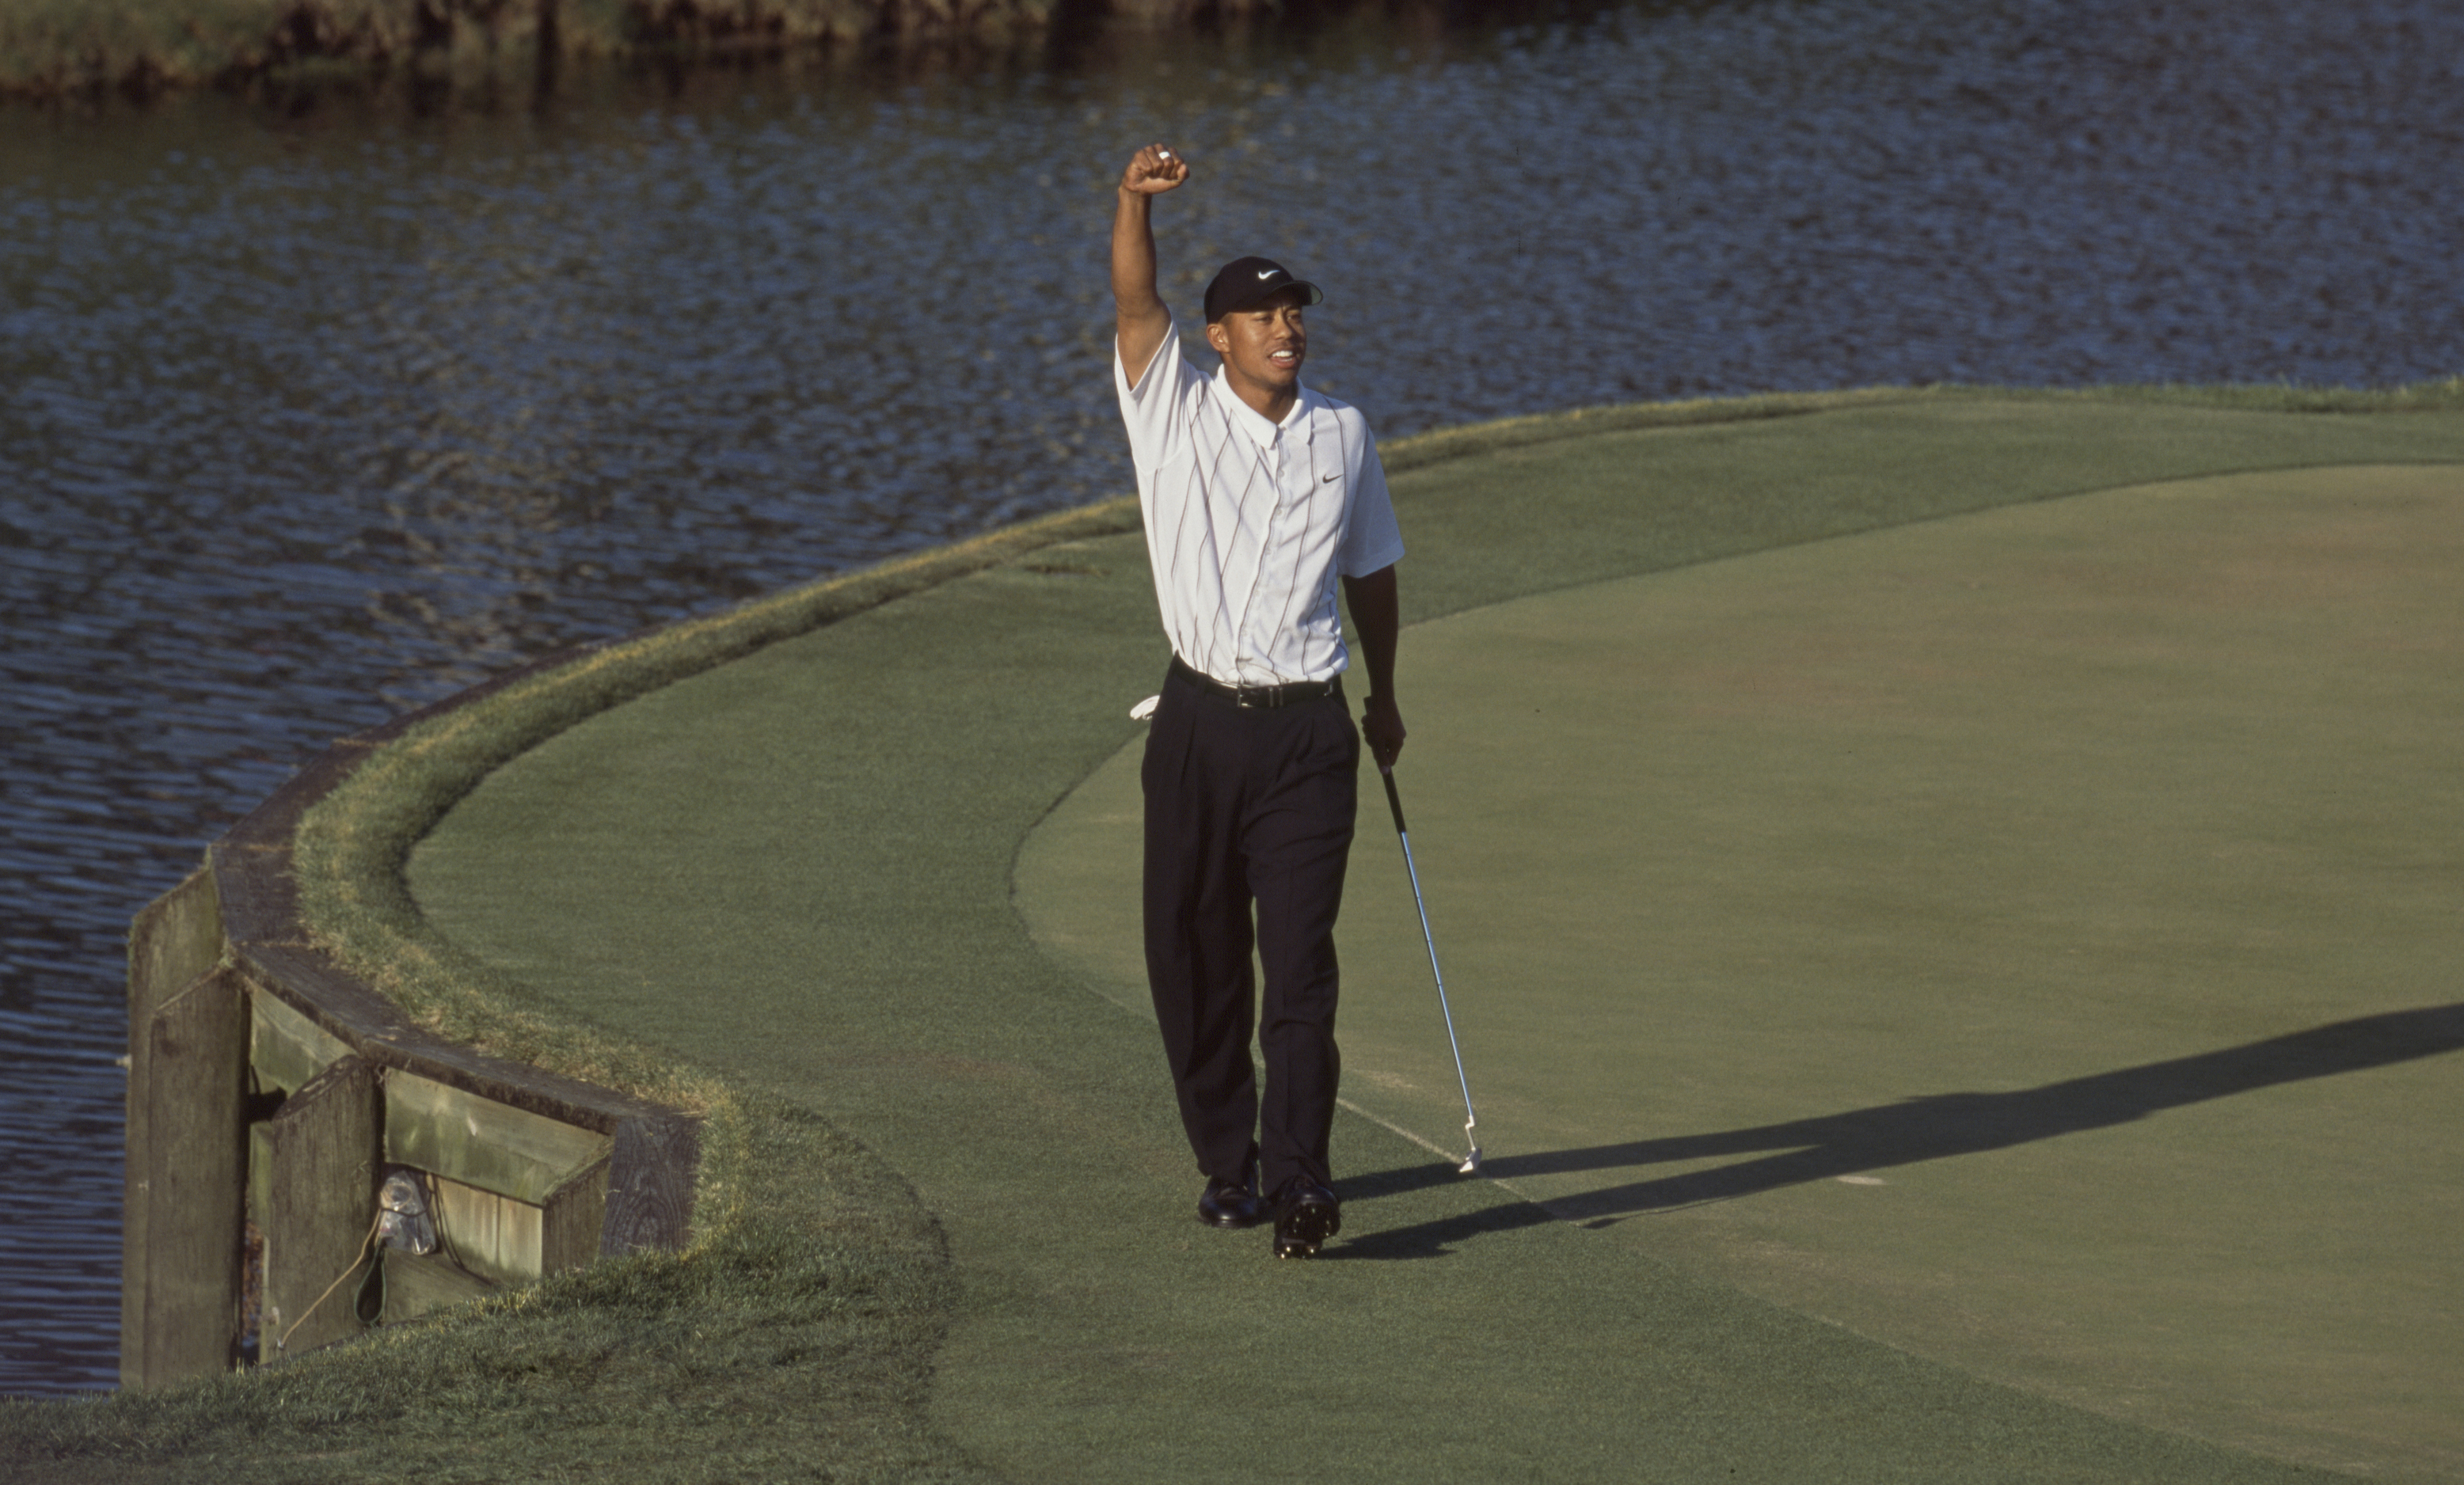 Players 2022: The 40 best moments from 40 years at TPC Sawgrass